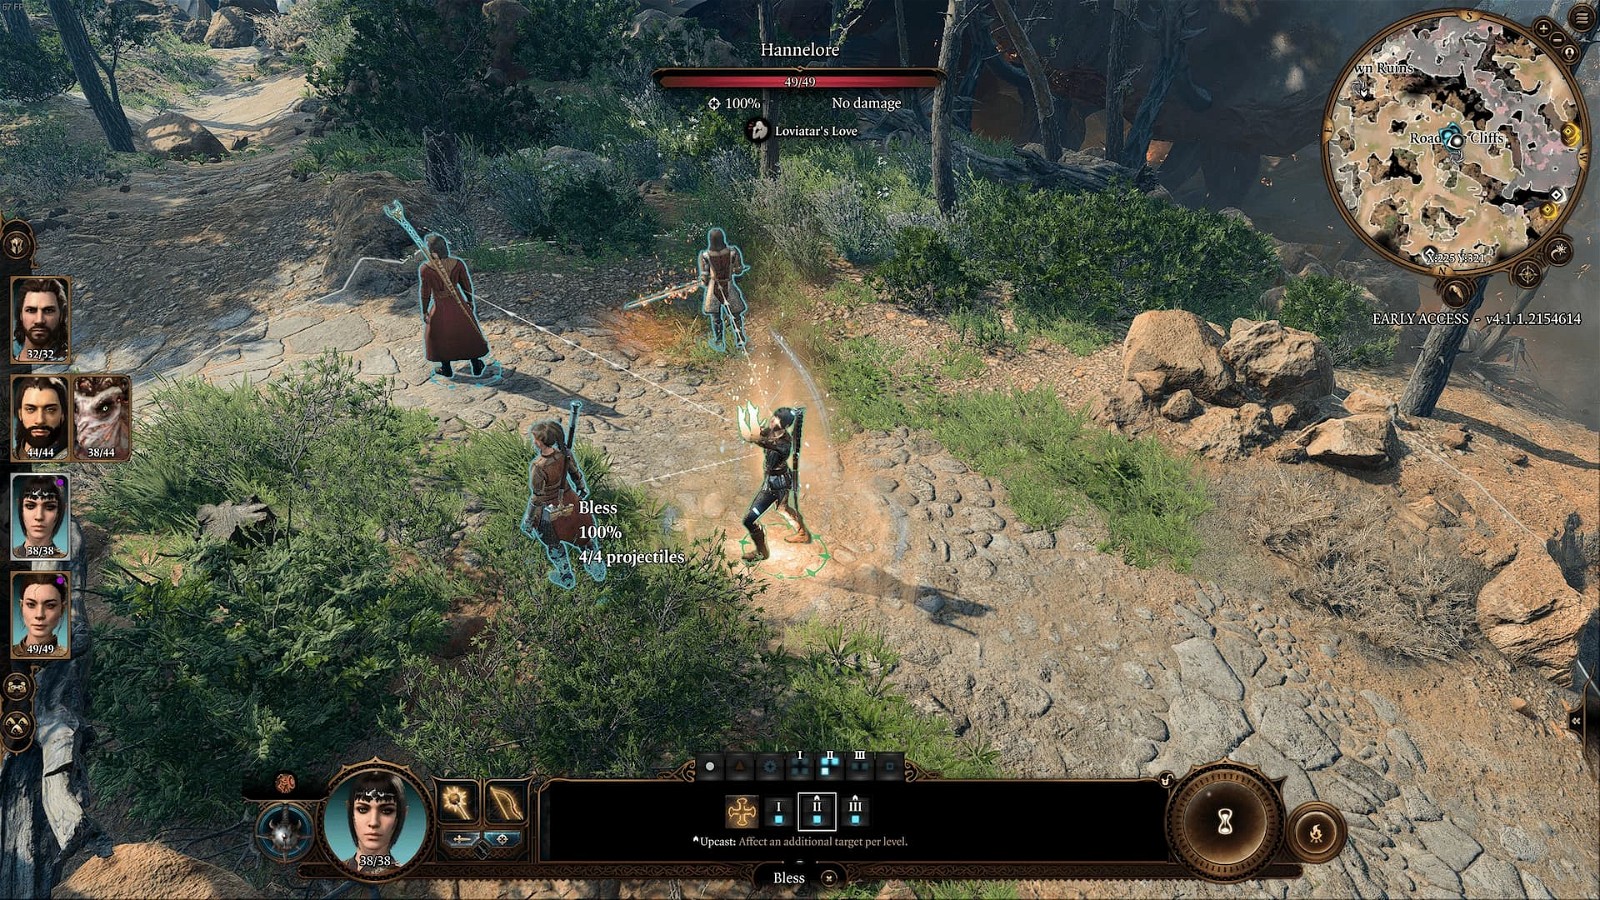 Players can choose their targets for Bless And Bane spells in Baldur's Gate 3